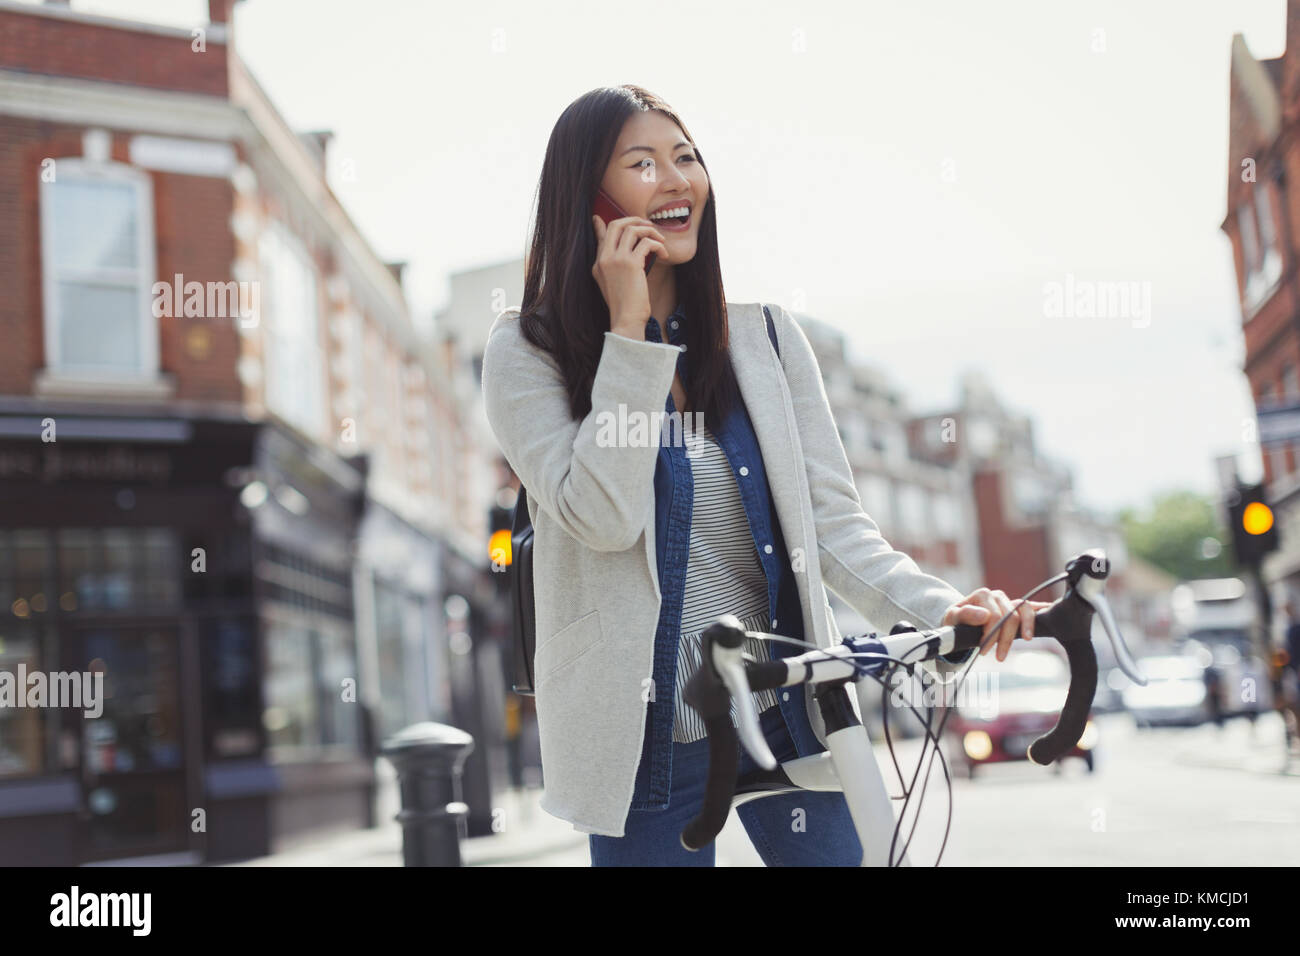 Smiling young woman commuting on bicycle, talking on cell phone on sunny urban street Stock Photo